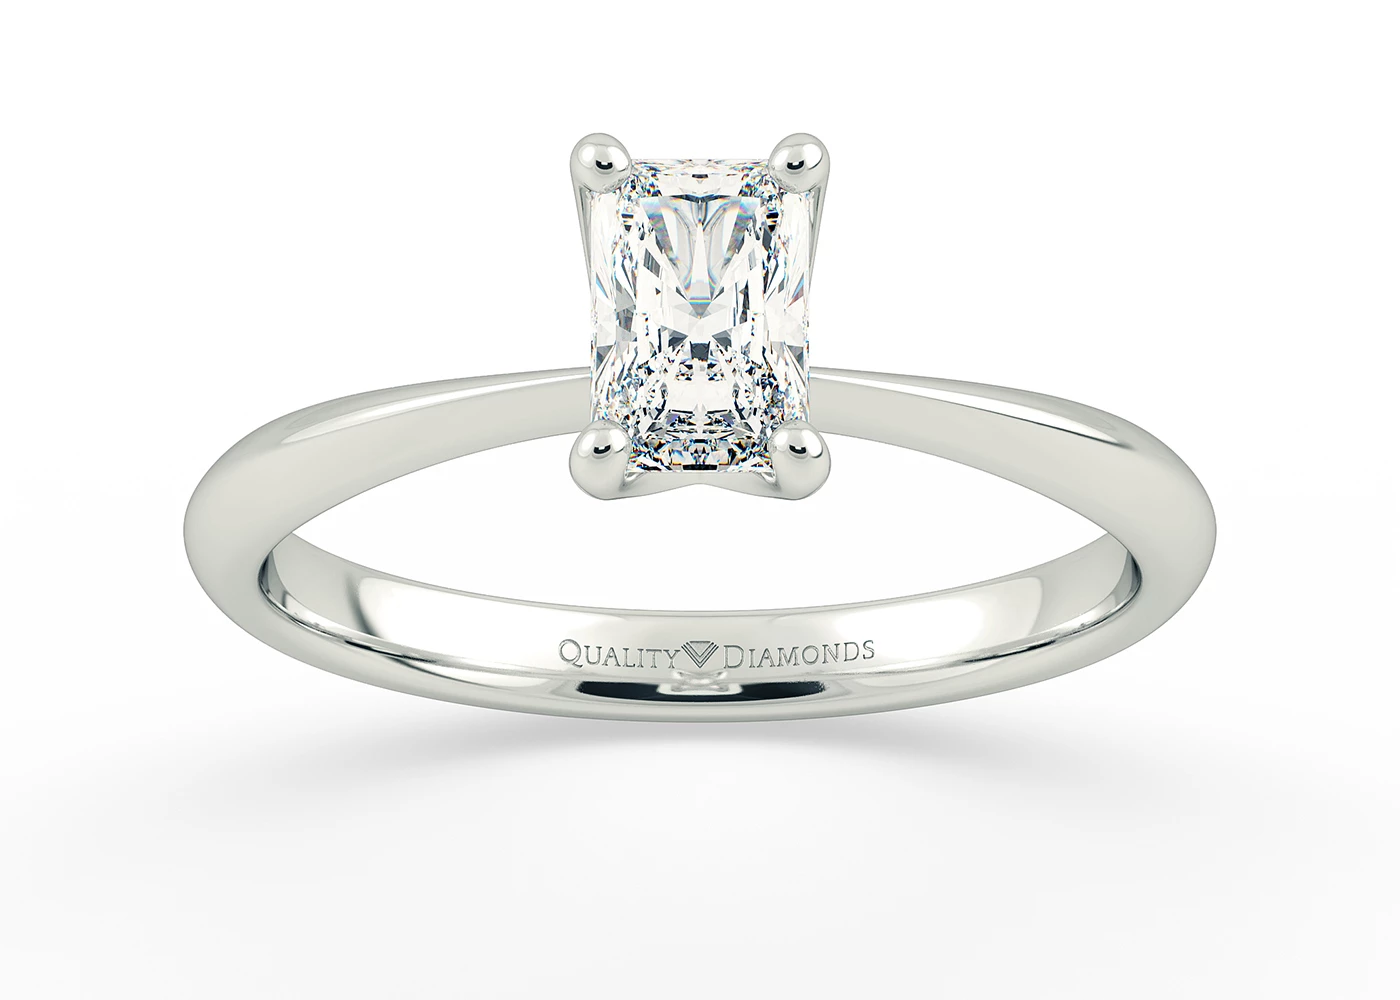 Two Carat Radiant Solitaire Diamond Engagement Ring in 9K White Gold